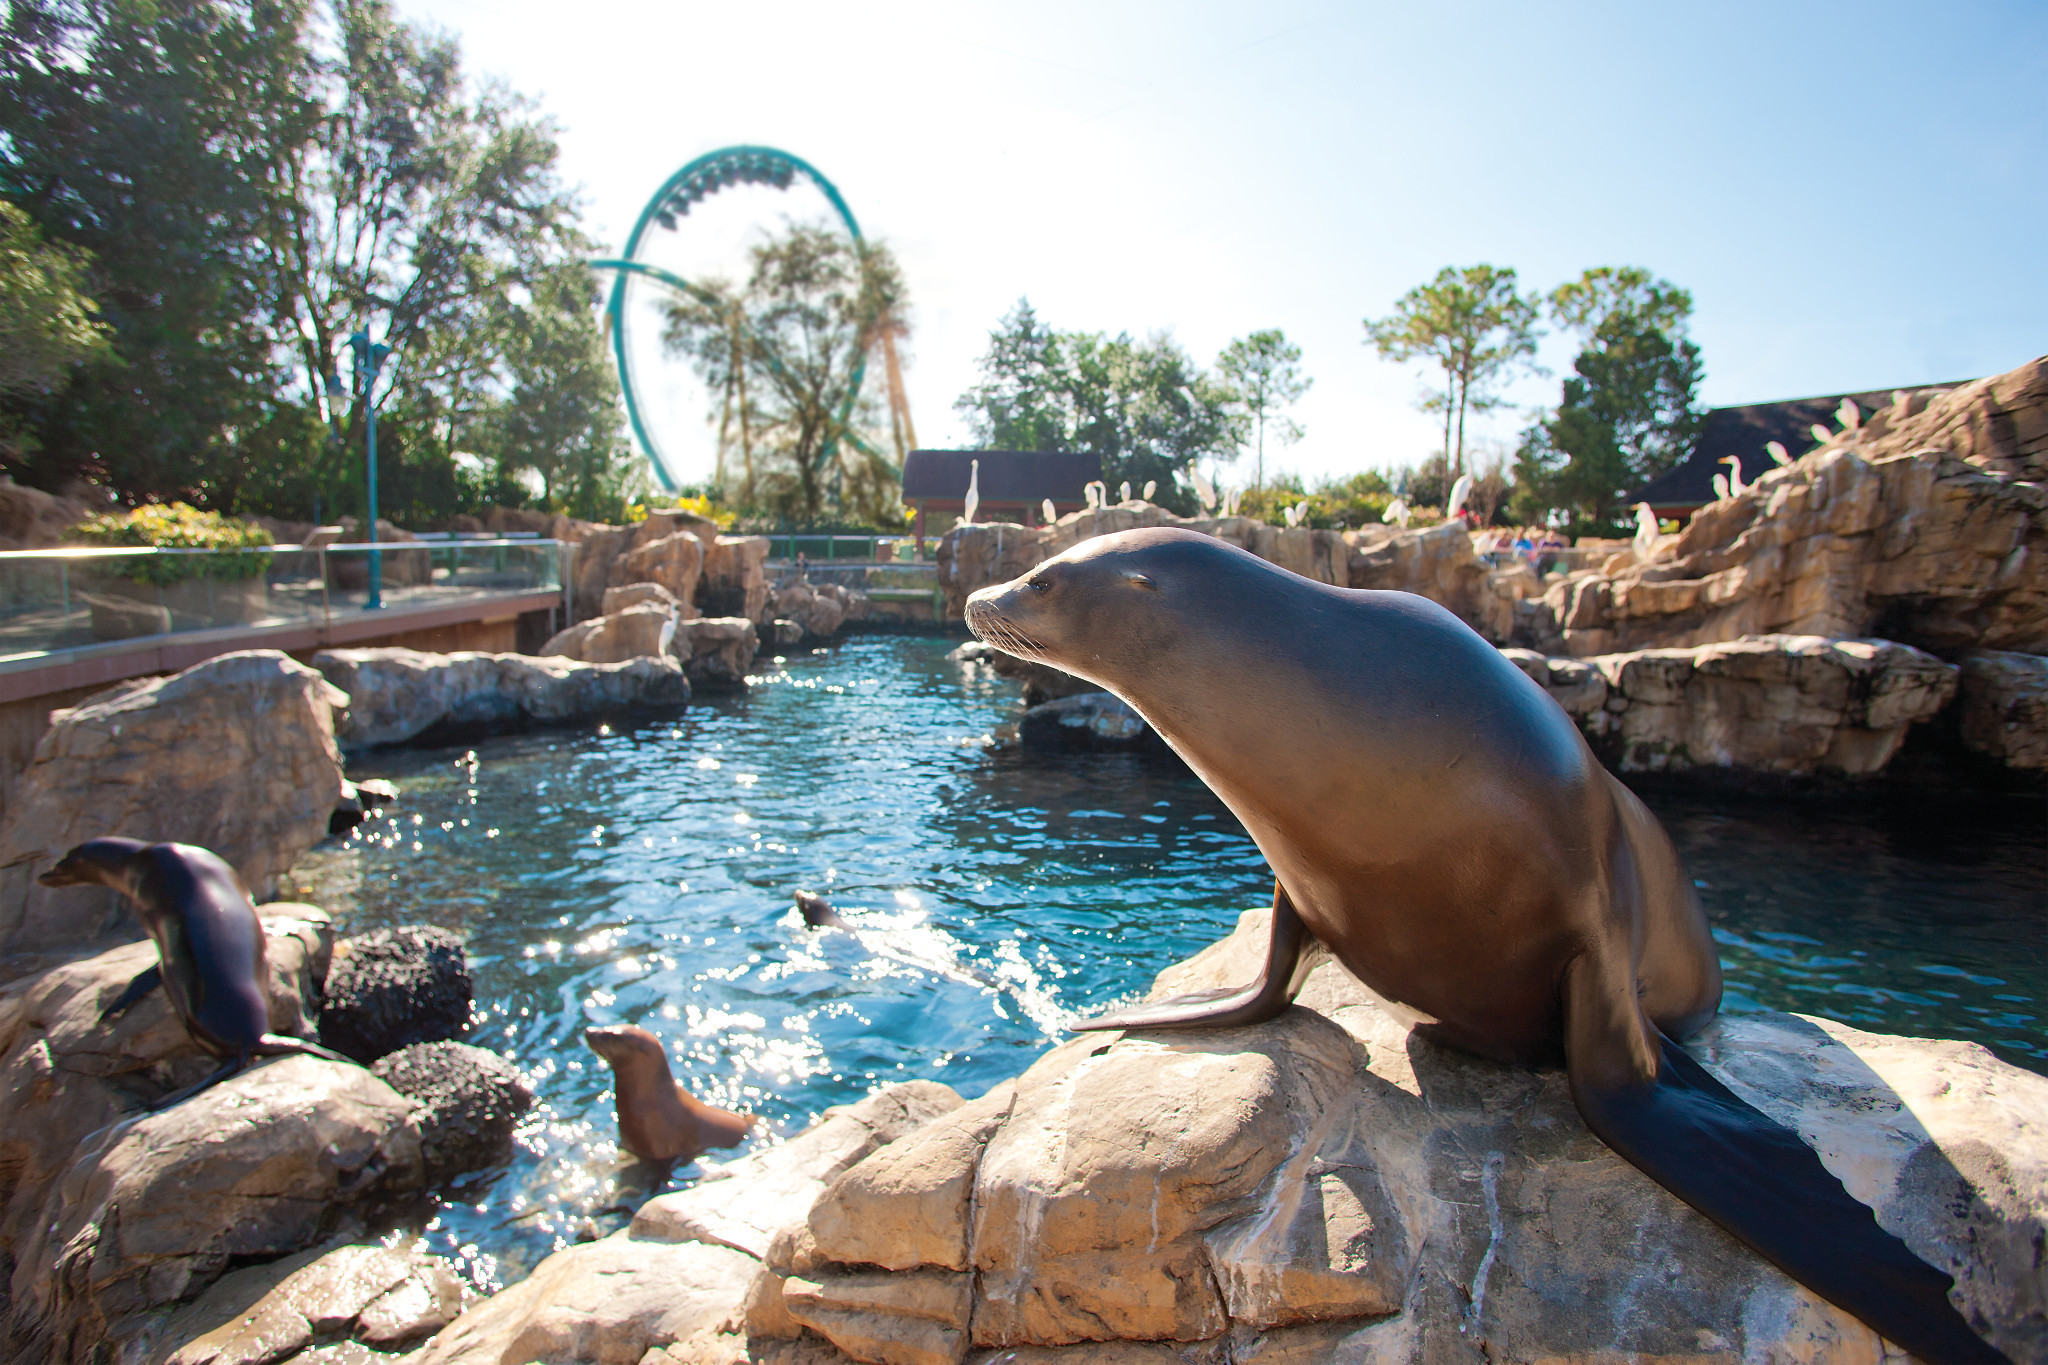 Sea Lion on Rock at SeaWorld Orlando with Coaster in the Background